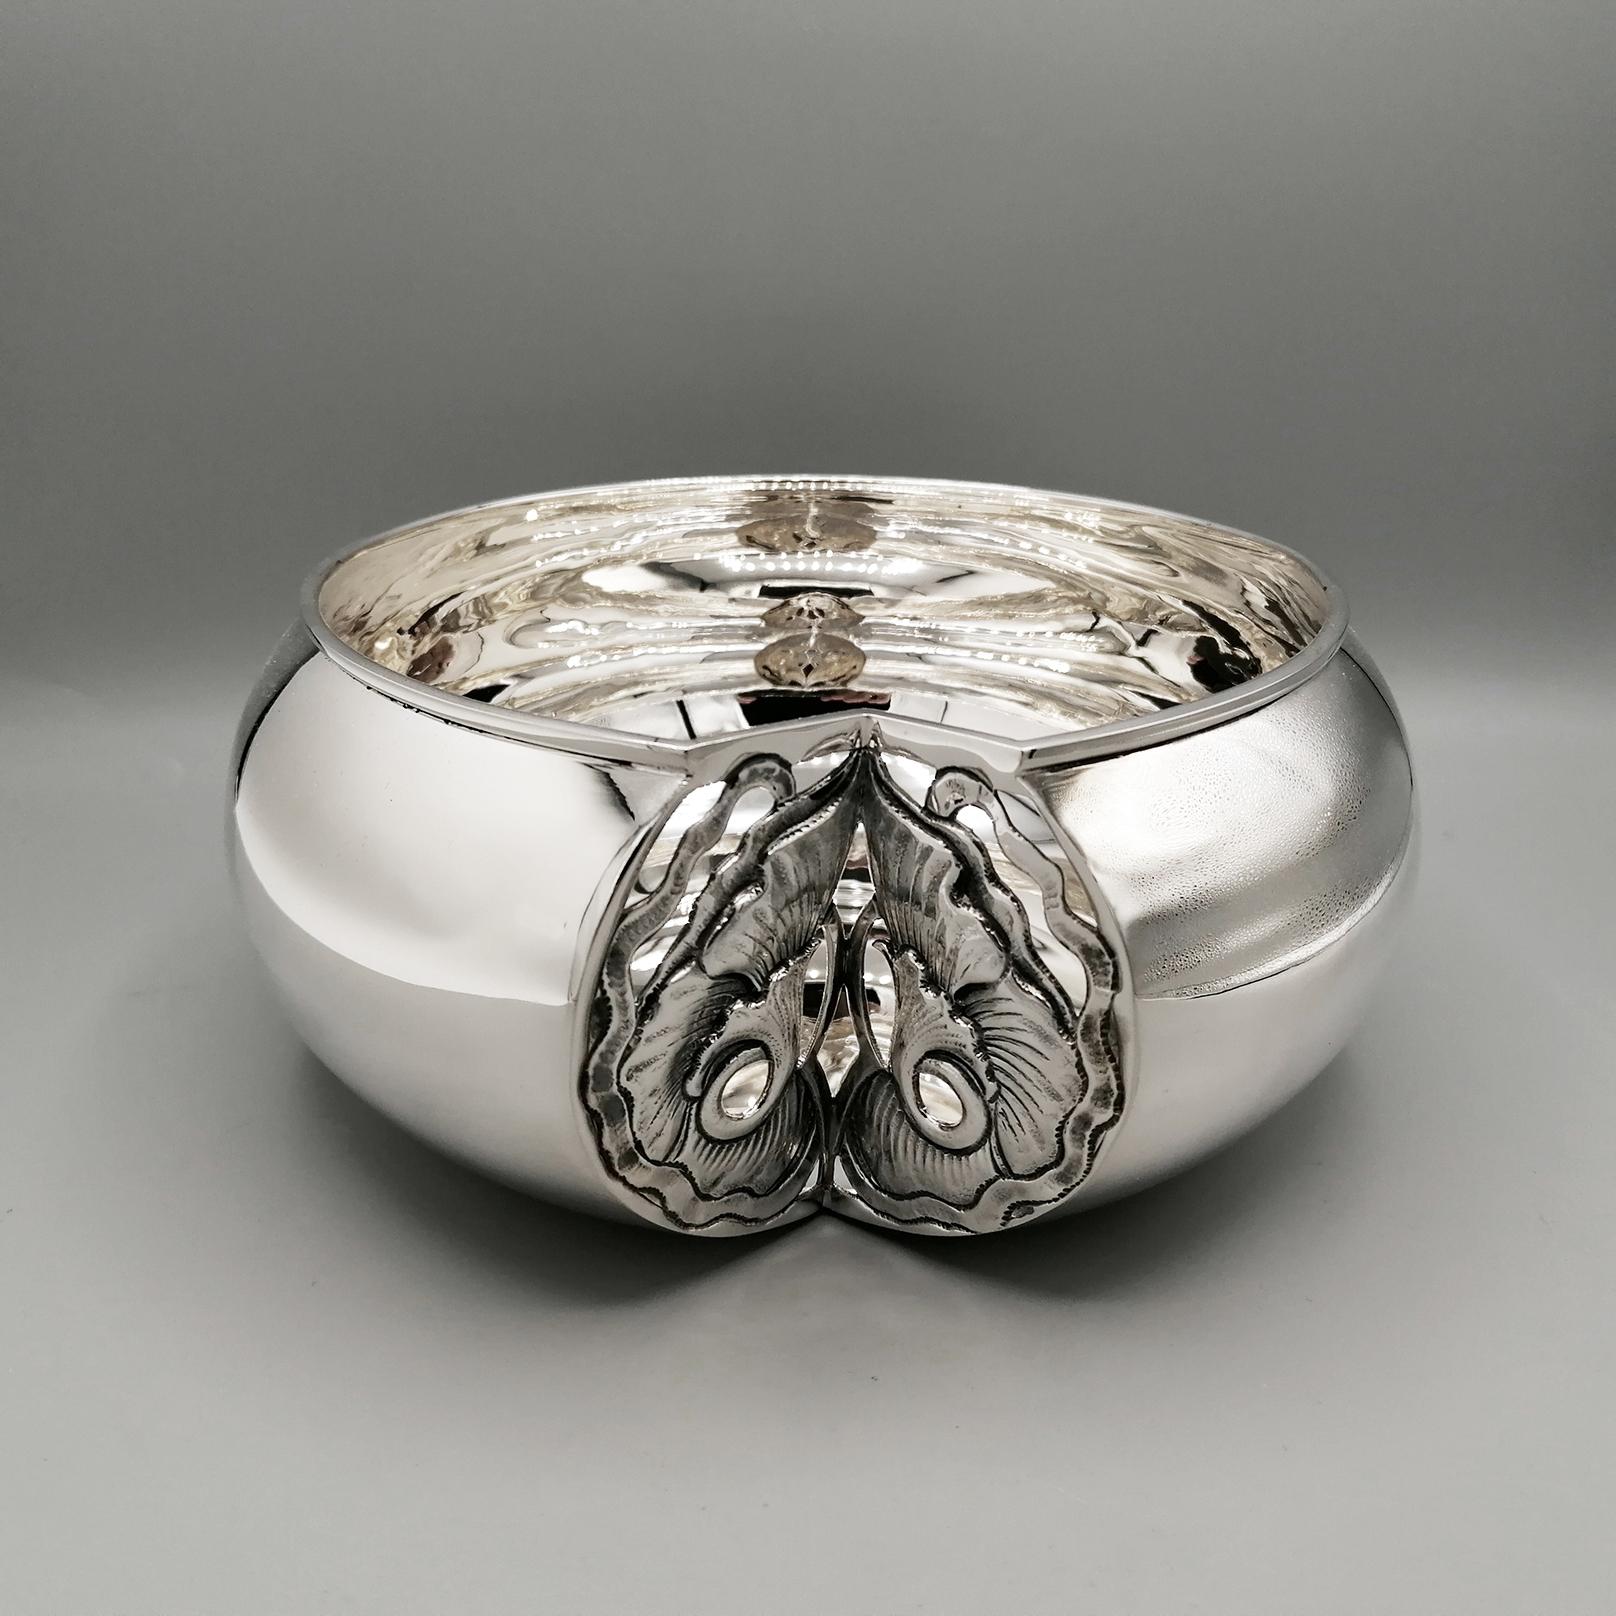 21st Century Italian Sterling Silver Liberty Style Bowl For Sale 7